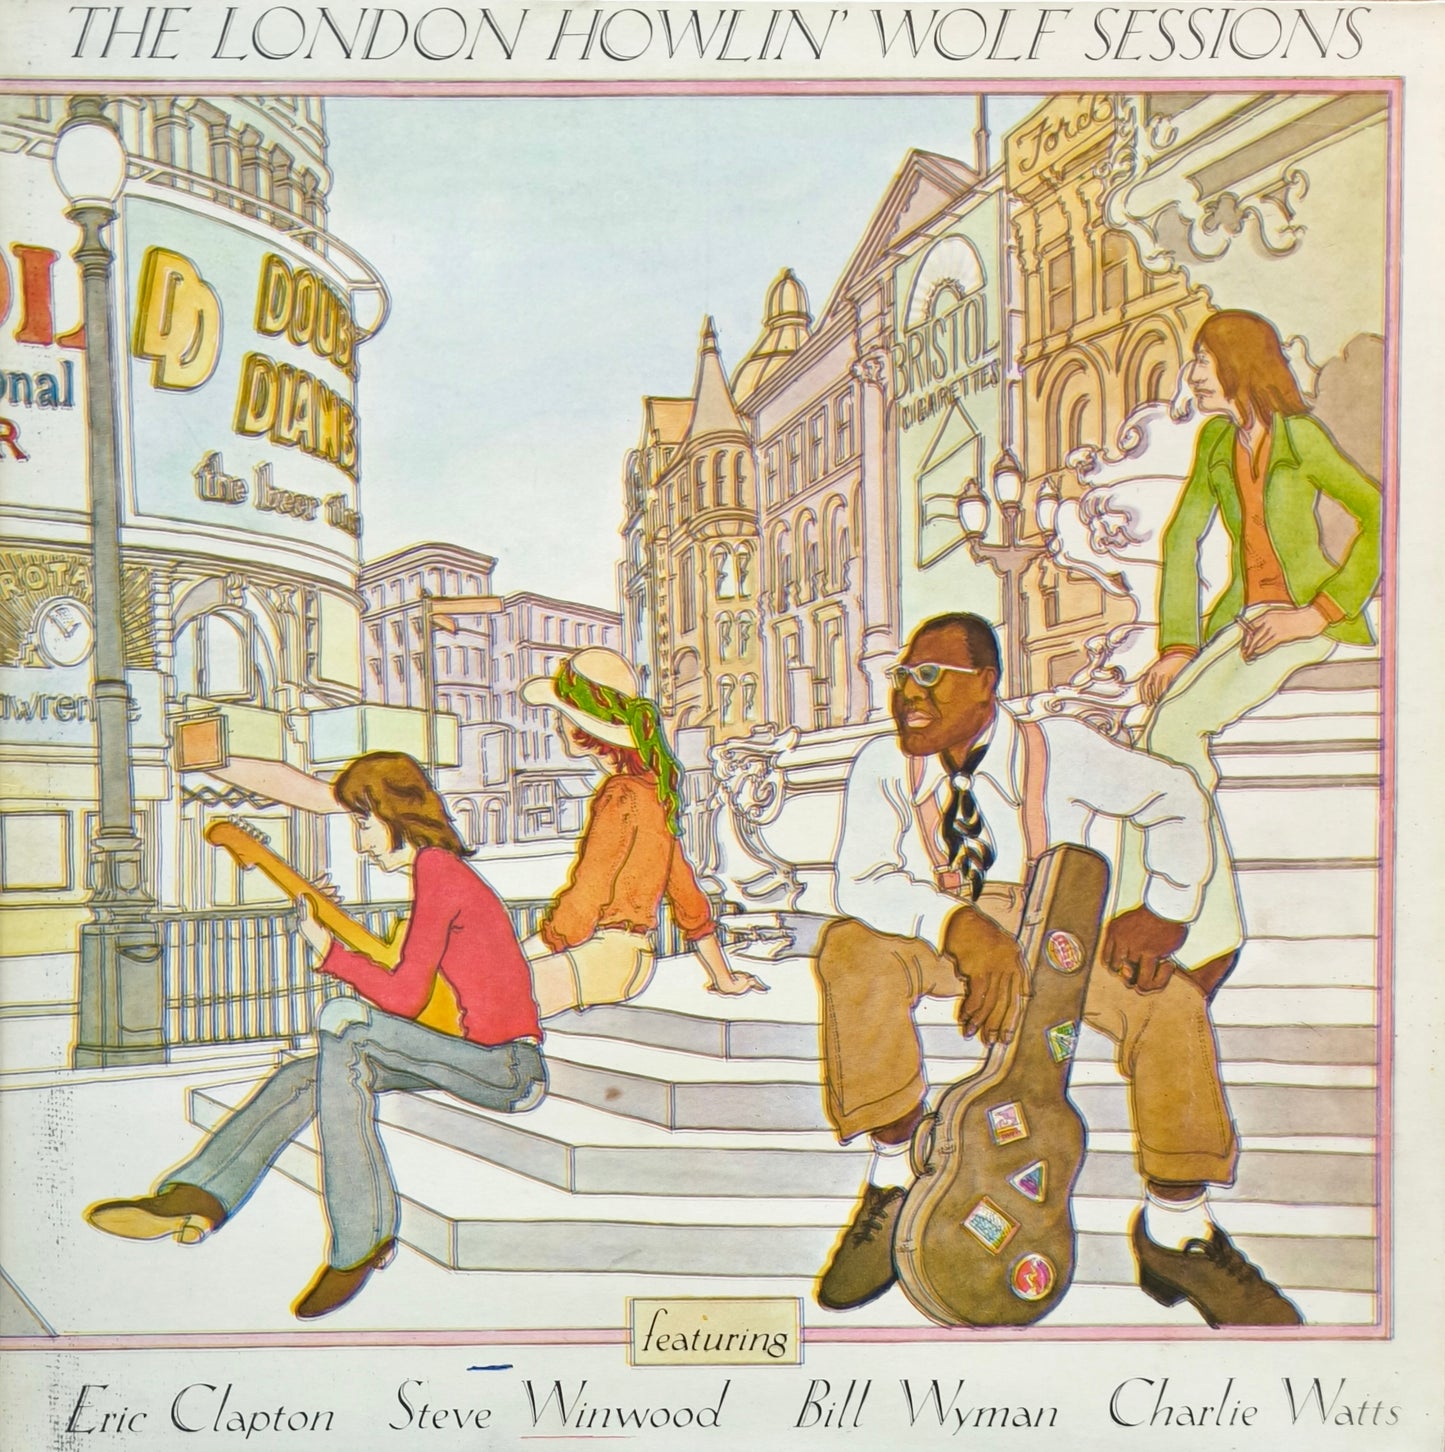 HOWLIN' WOLF - The London Howlin' Wolf Sessions (pressage UK 71)